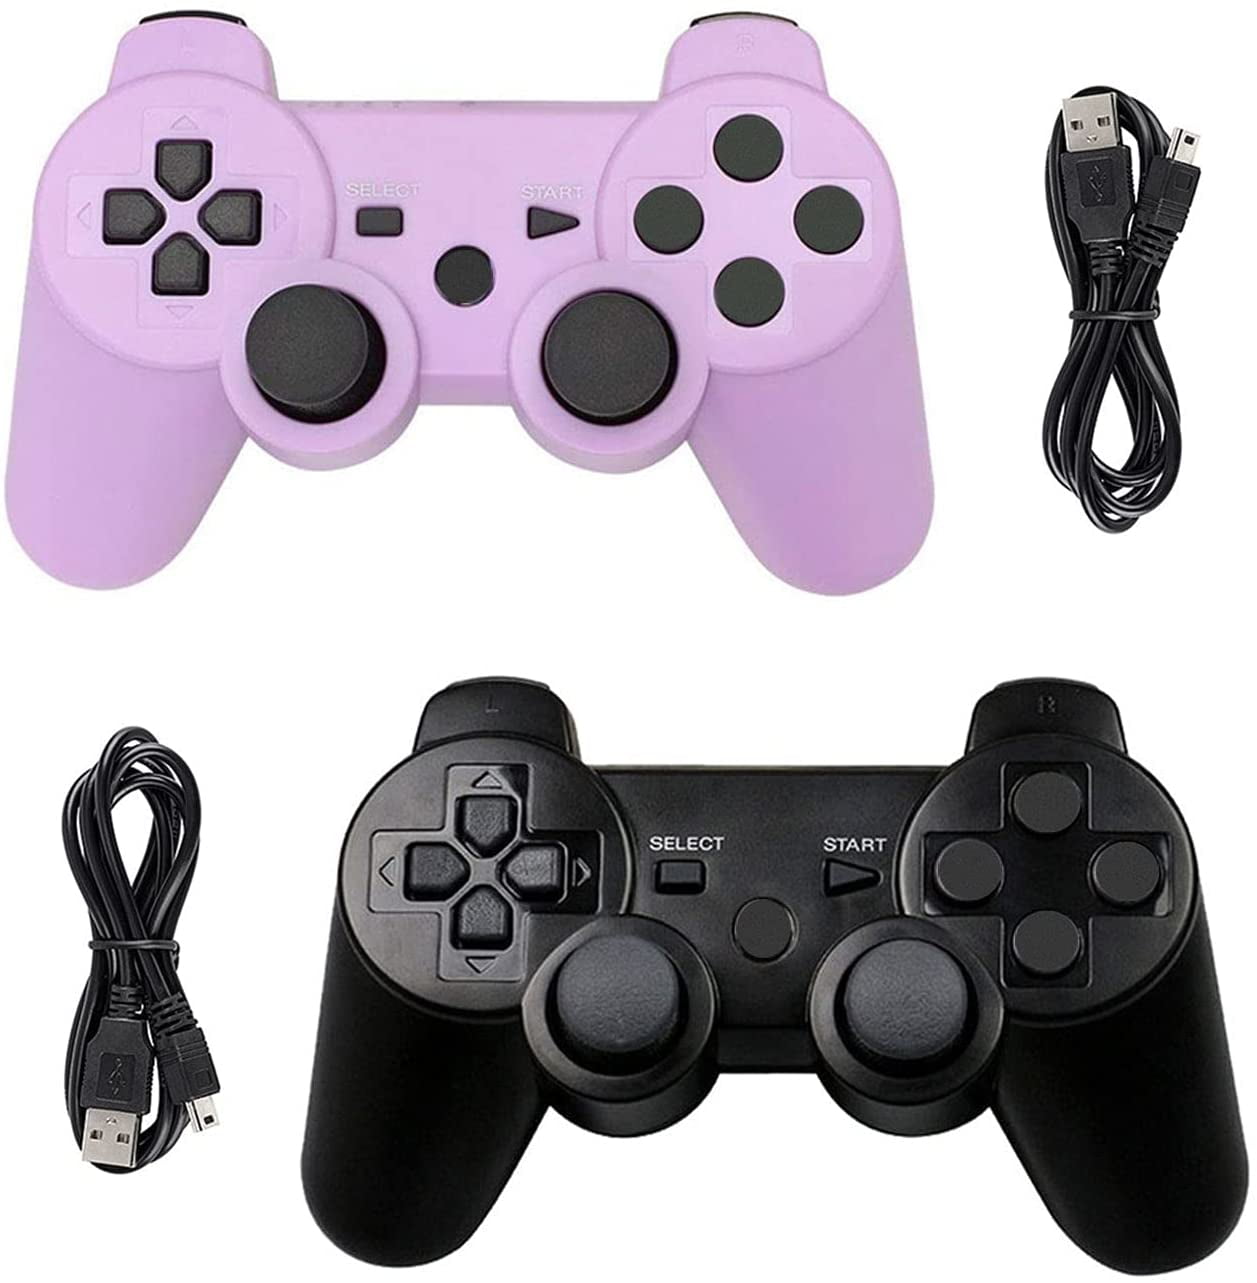 2 Pack Wireless Bluetooth Game Controller for PS3,Gamepads for PlayStation 3 Black+Black 